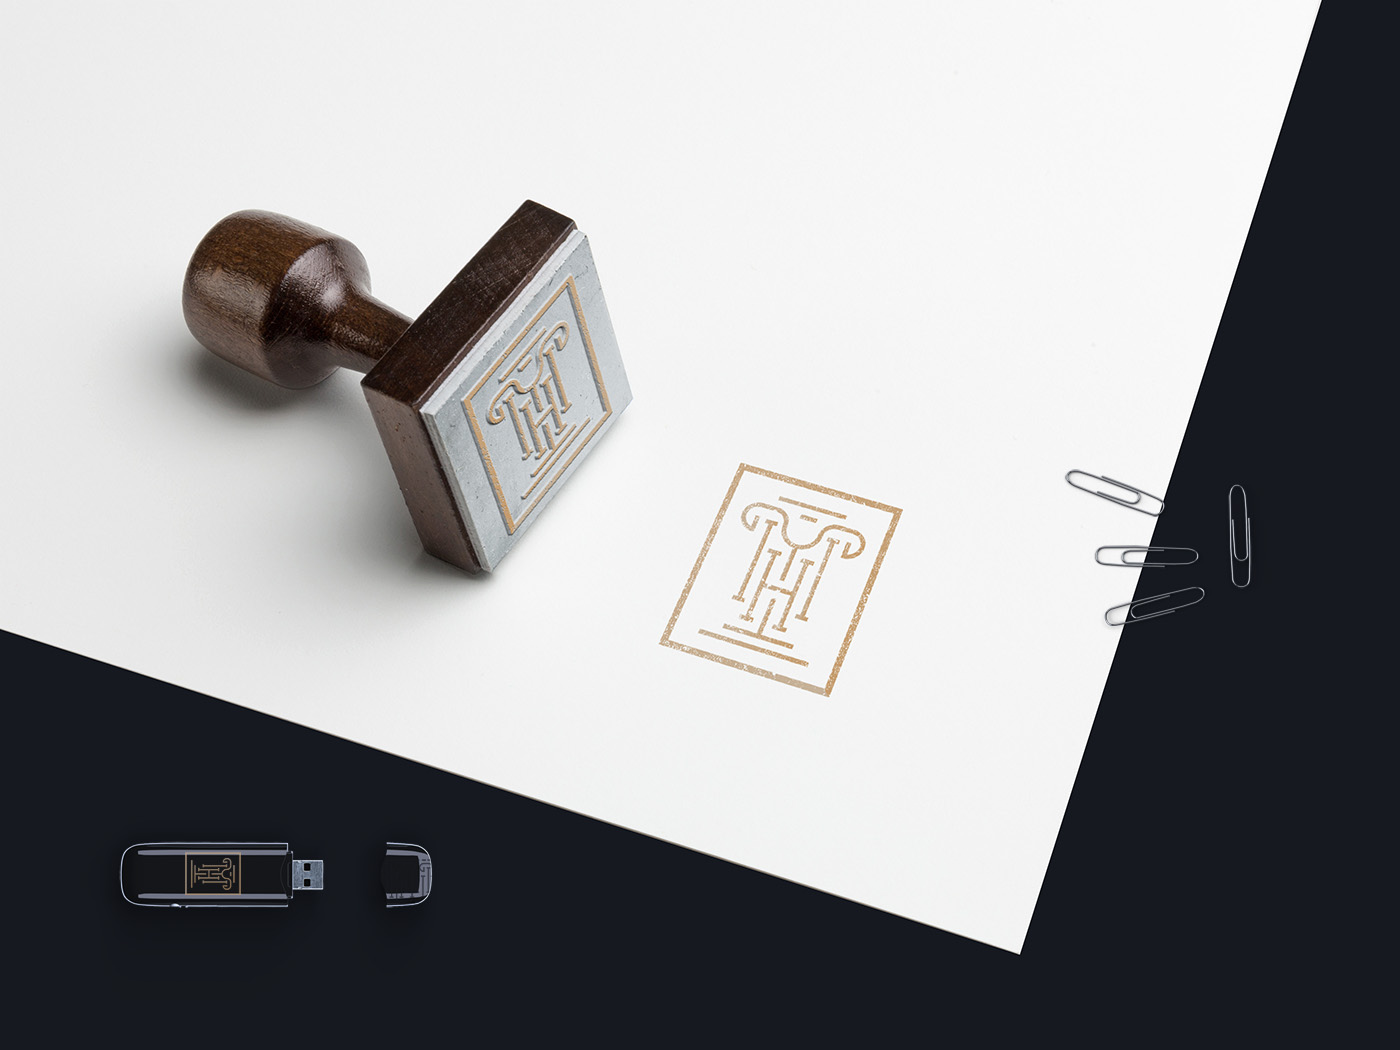 law firm logo court logo Law Firm Branding black branding Branding design creative logo Logo Design creative concept calligraphy logo